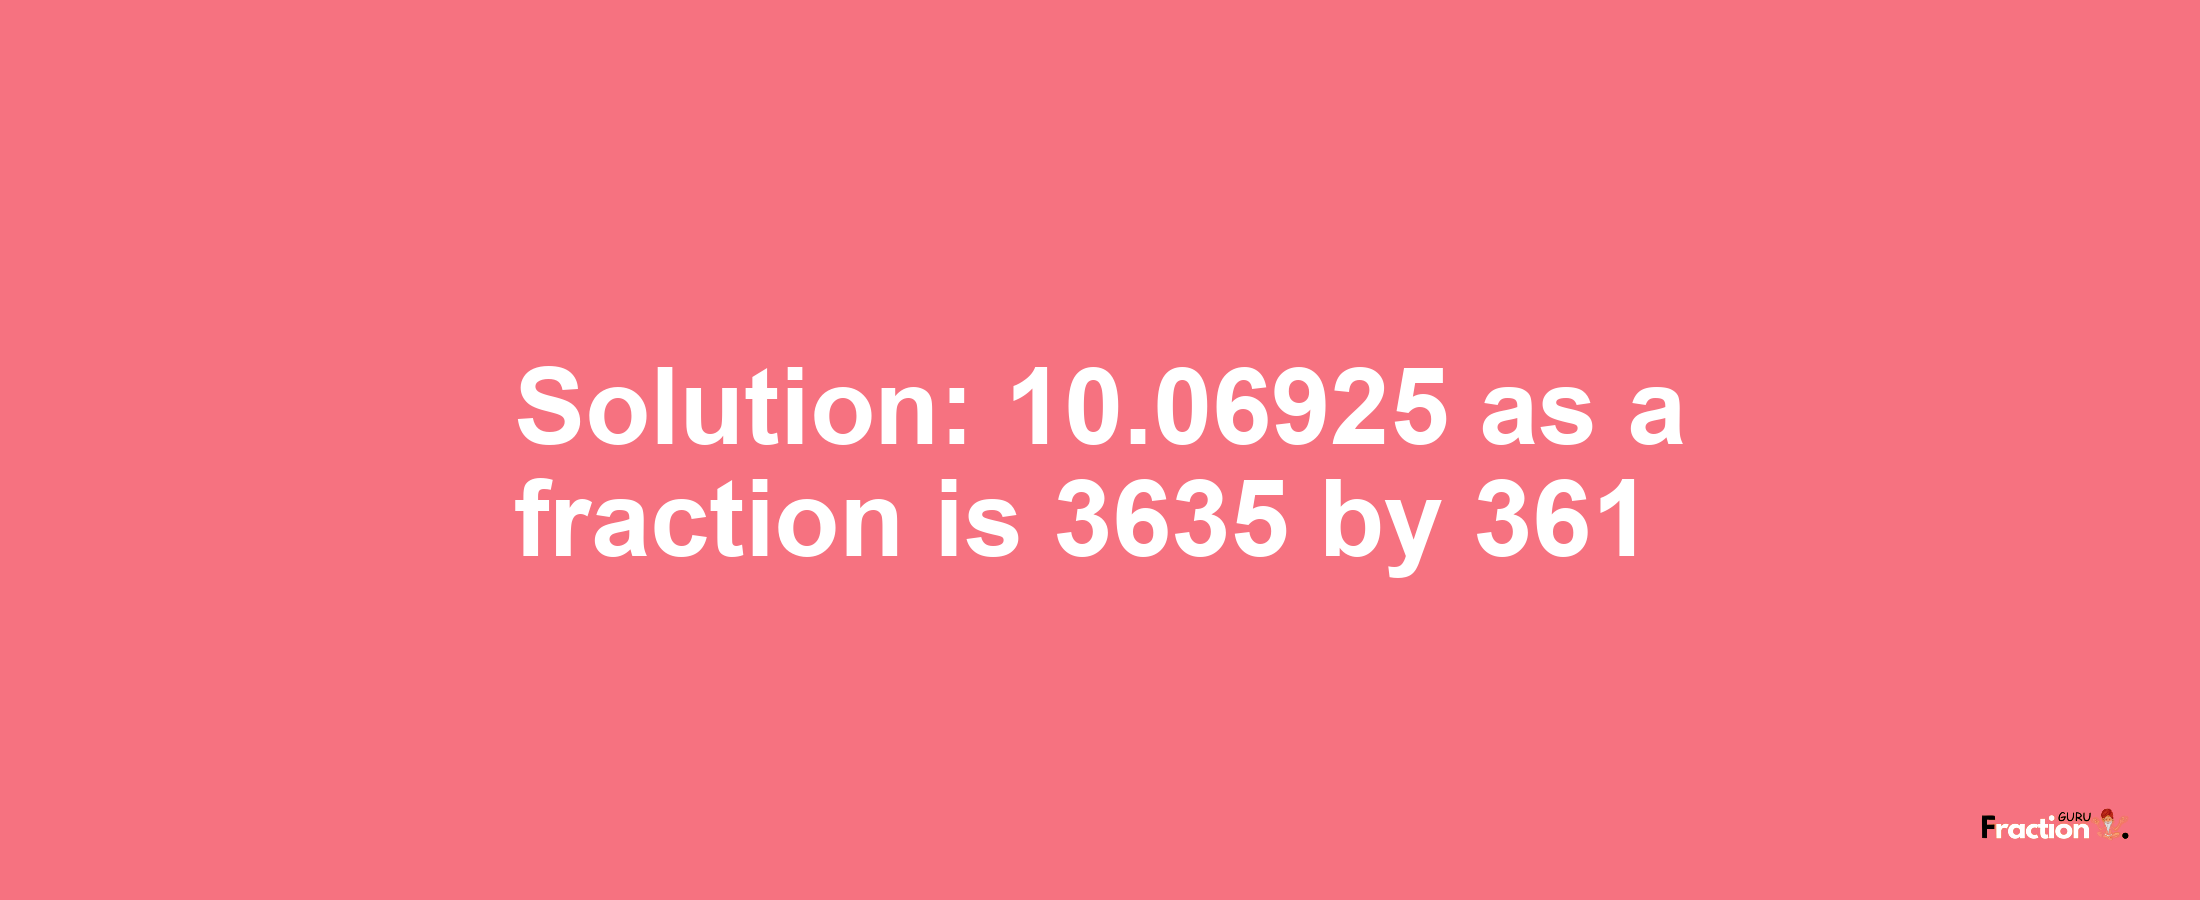 Solution:10.06925 as a fraction is 3635/361